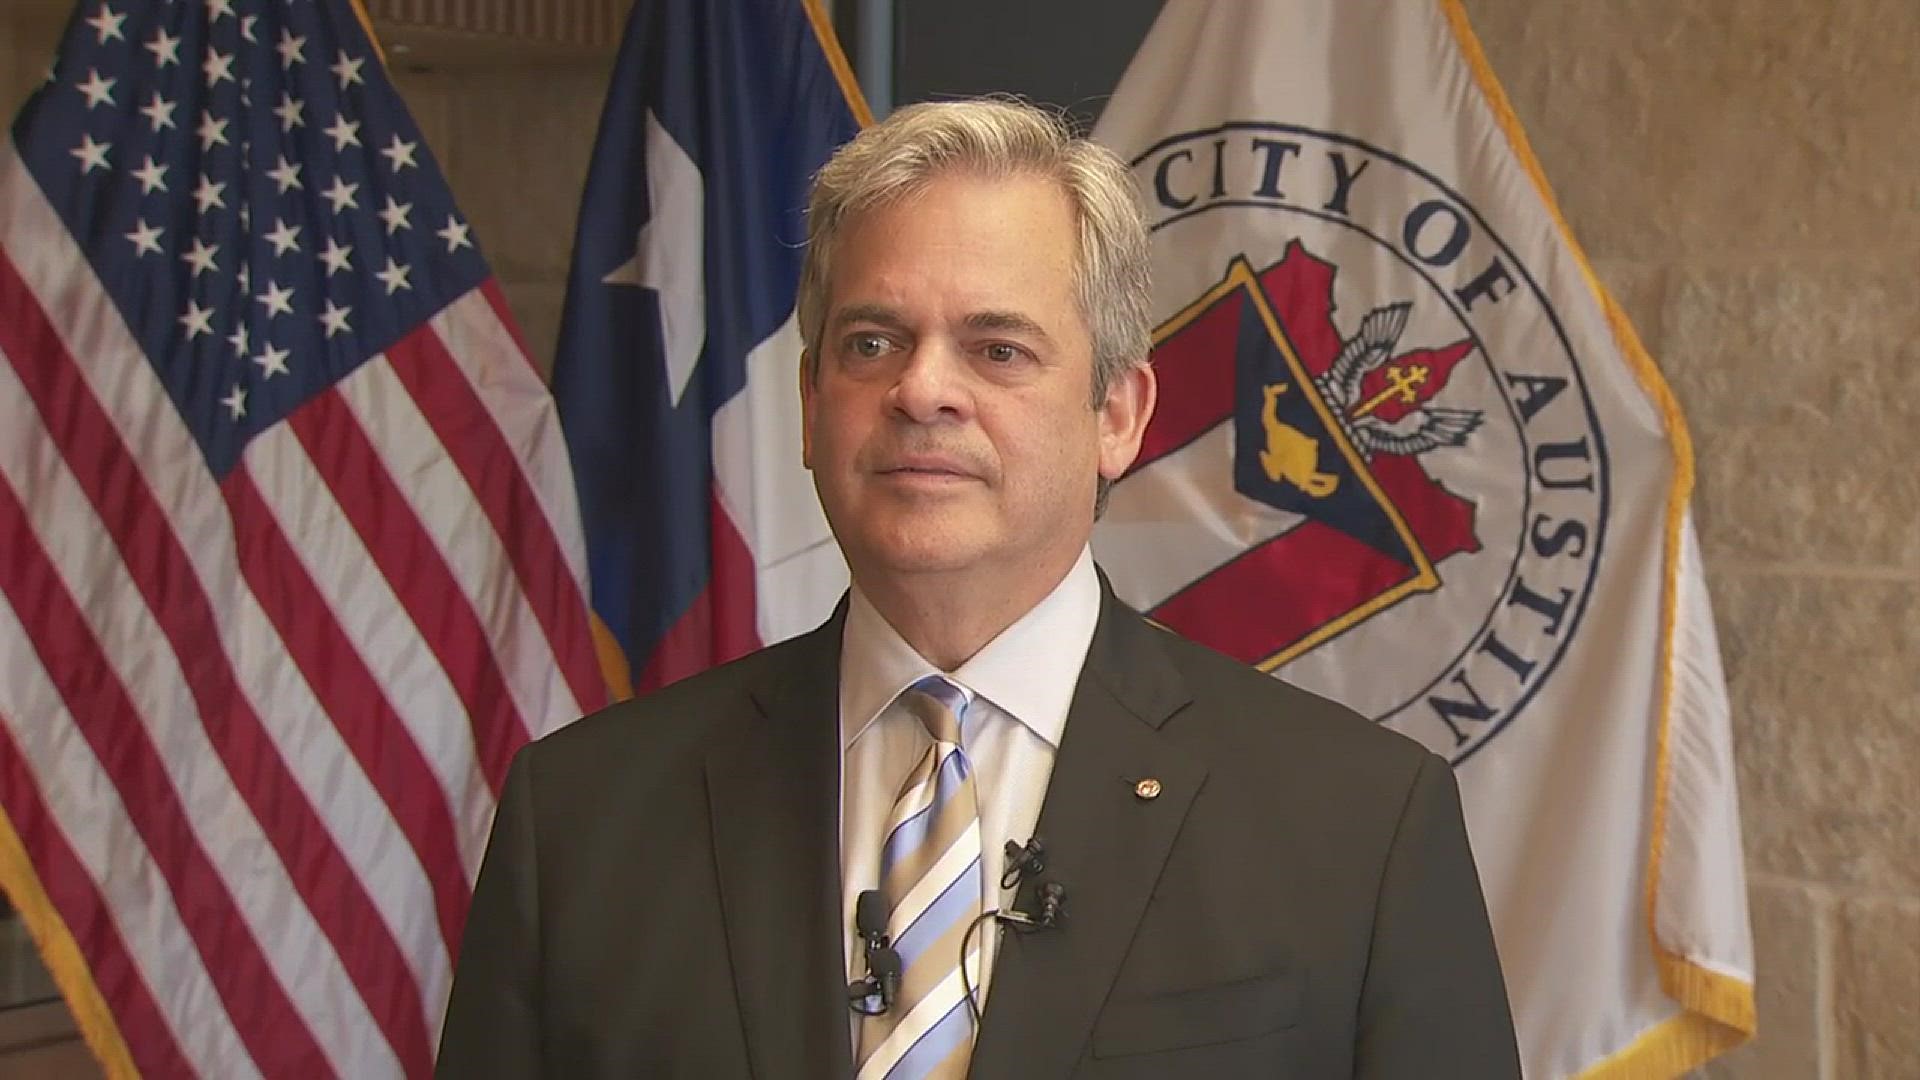 RAW: Mayor Adler says Austin's still safe after package explosions